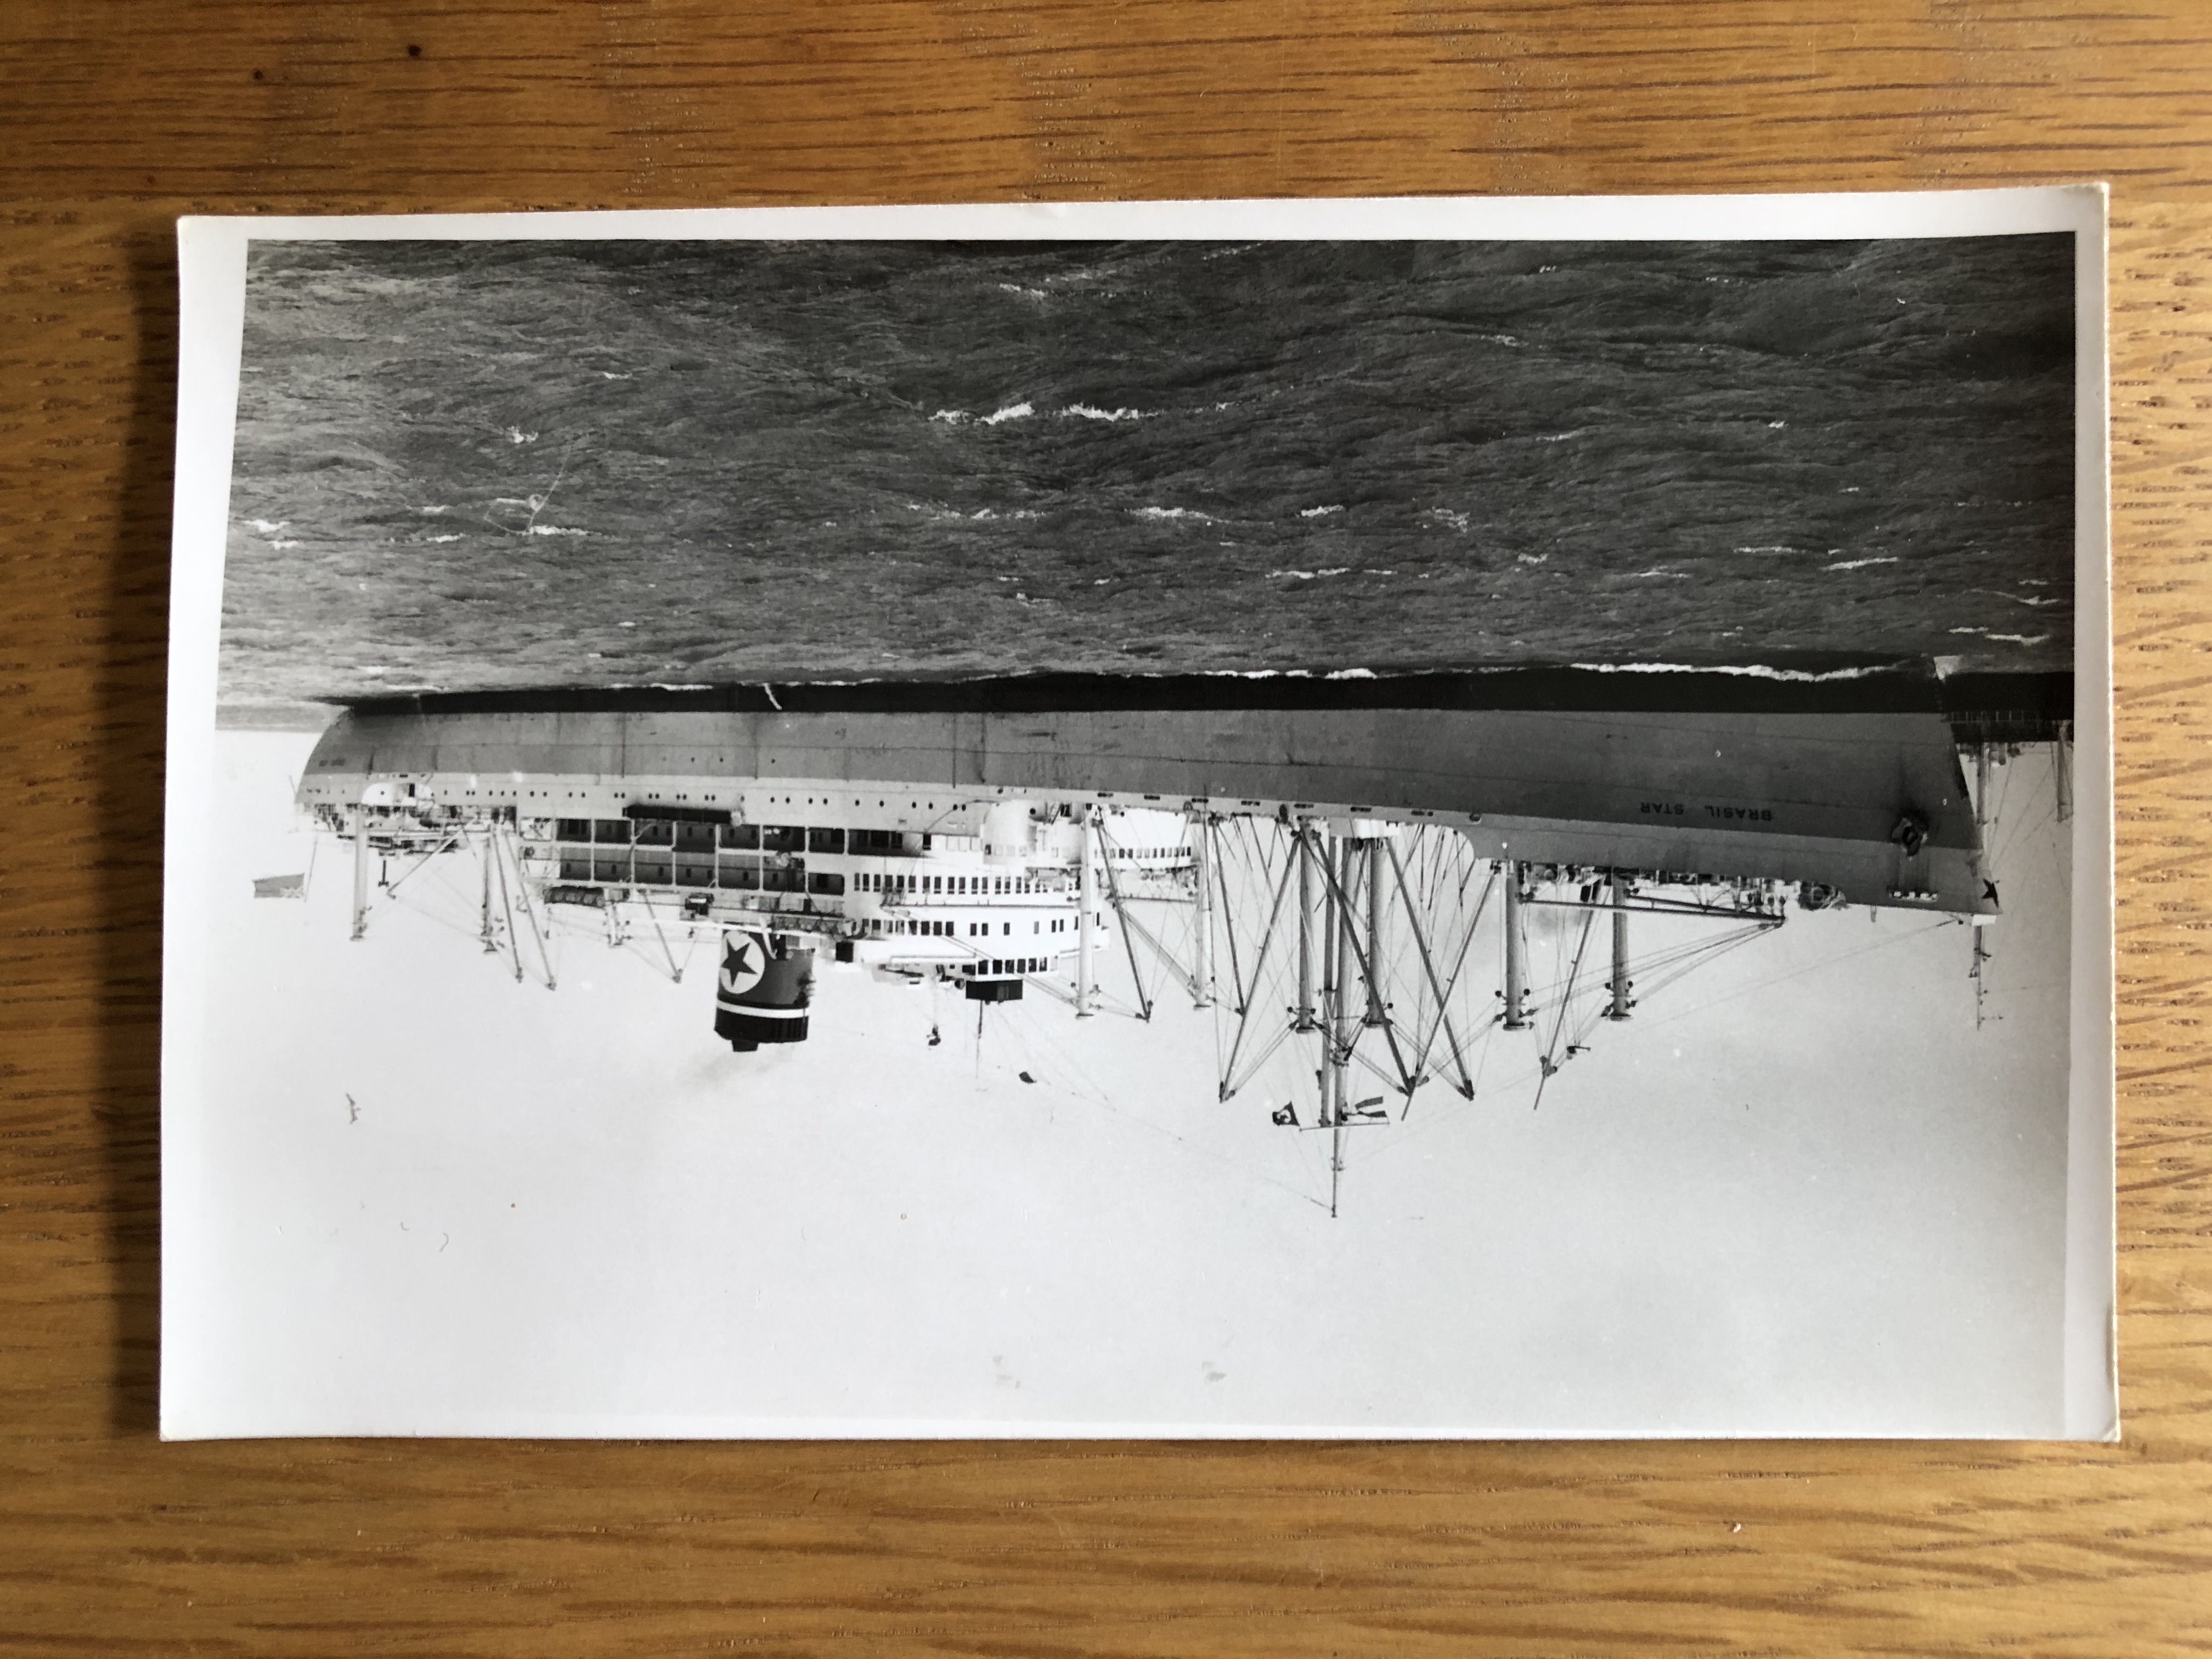 B&W PHOTOGRAPH OF THE VESSEL THE BRAZIL STAR